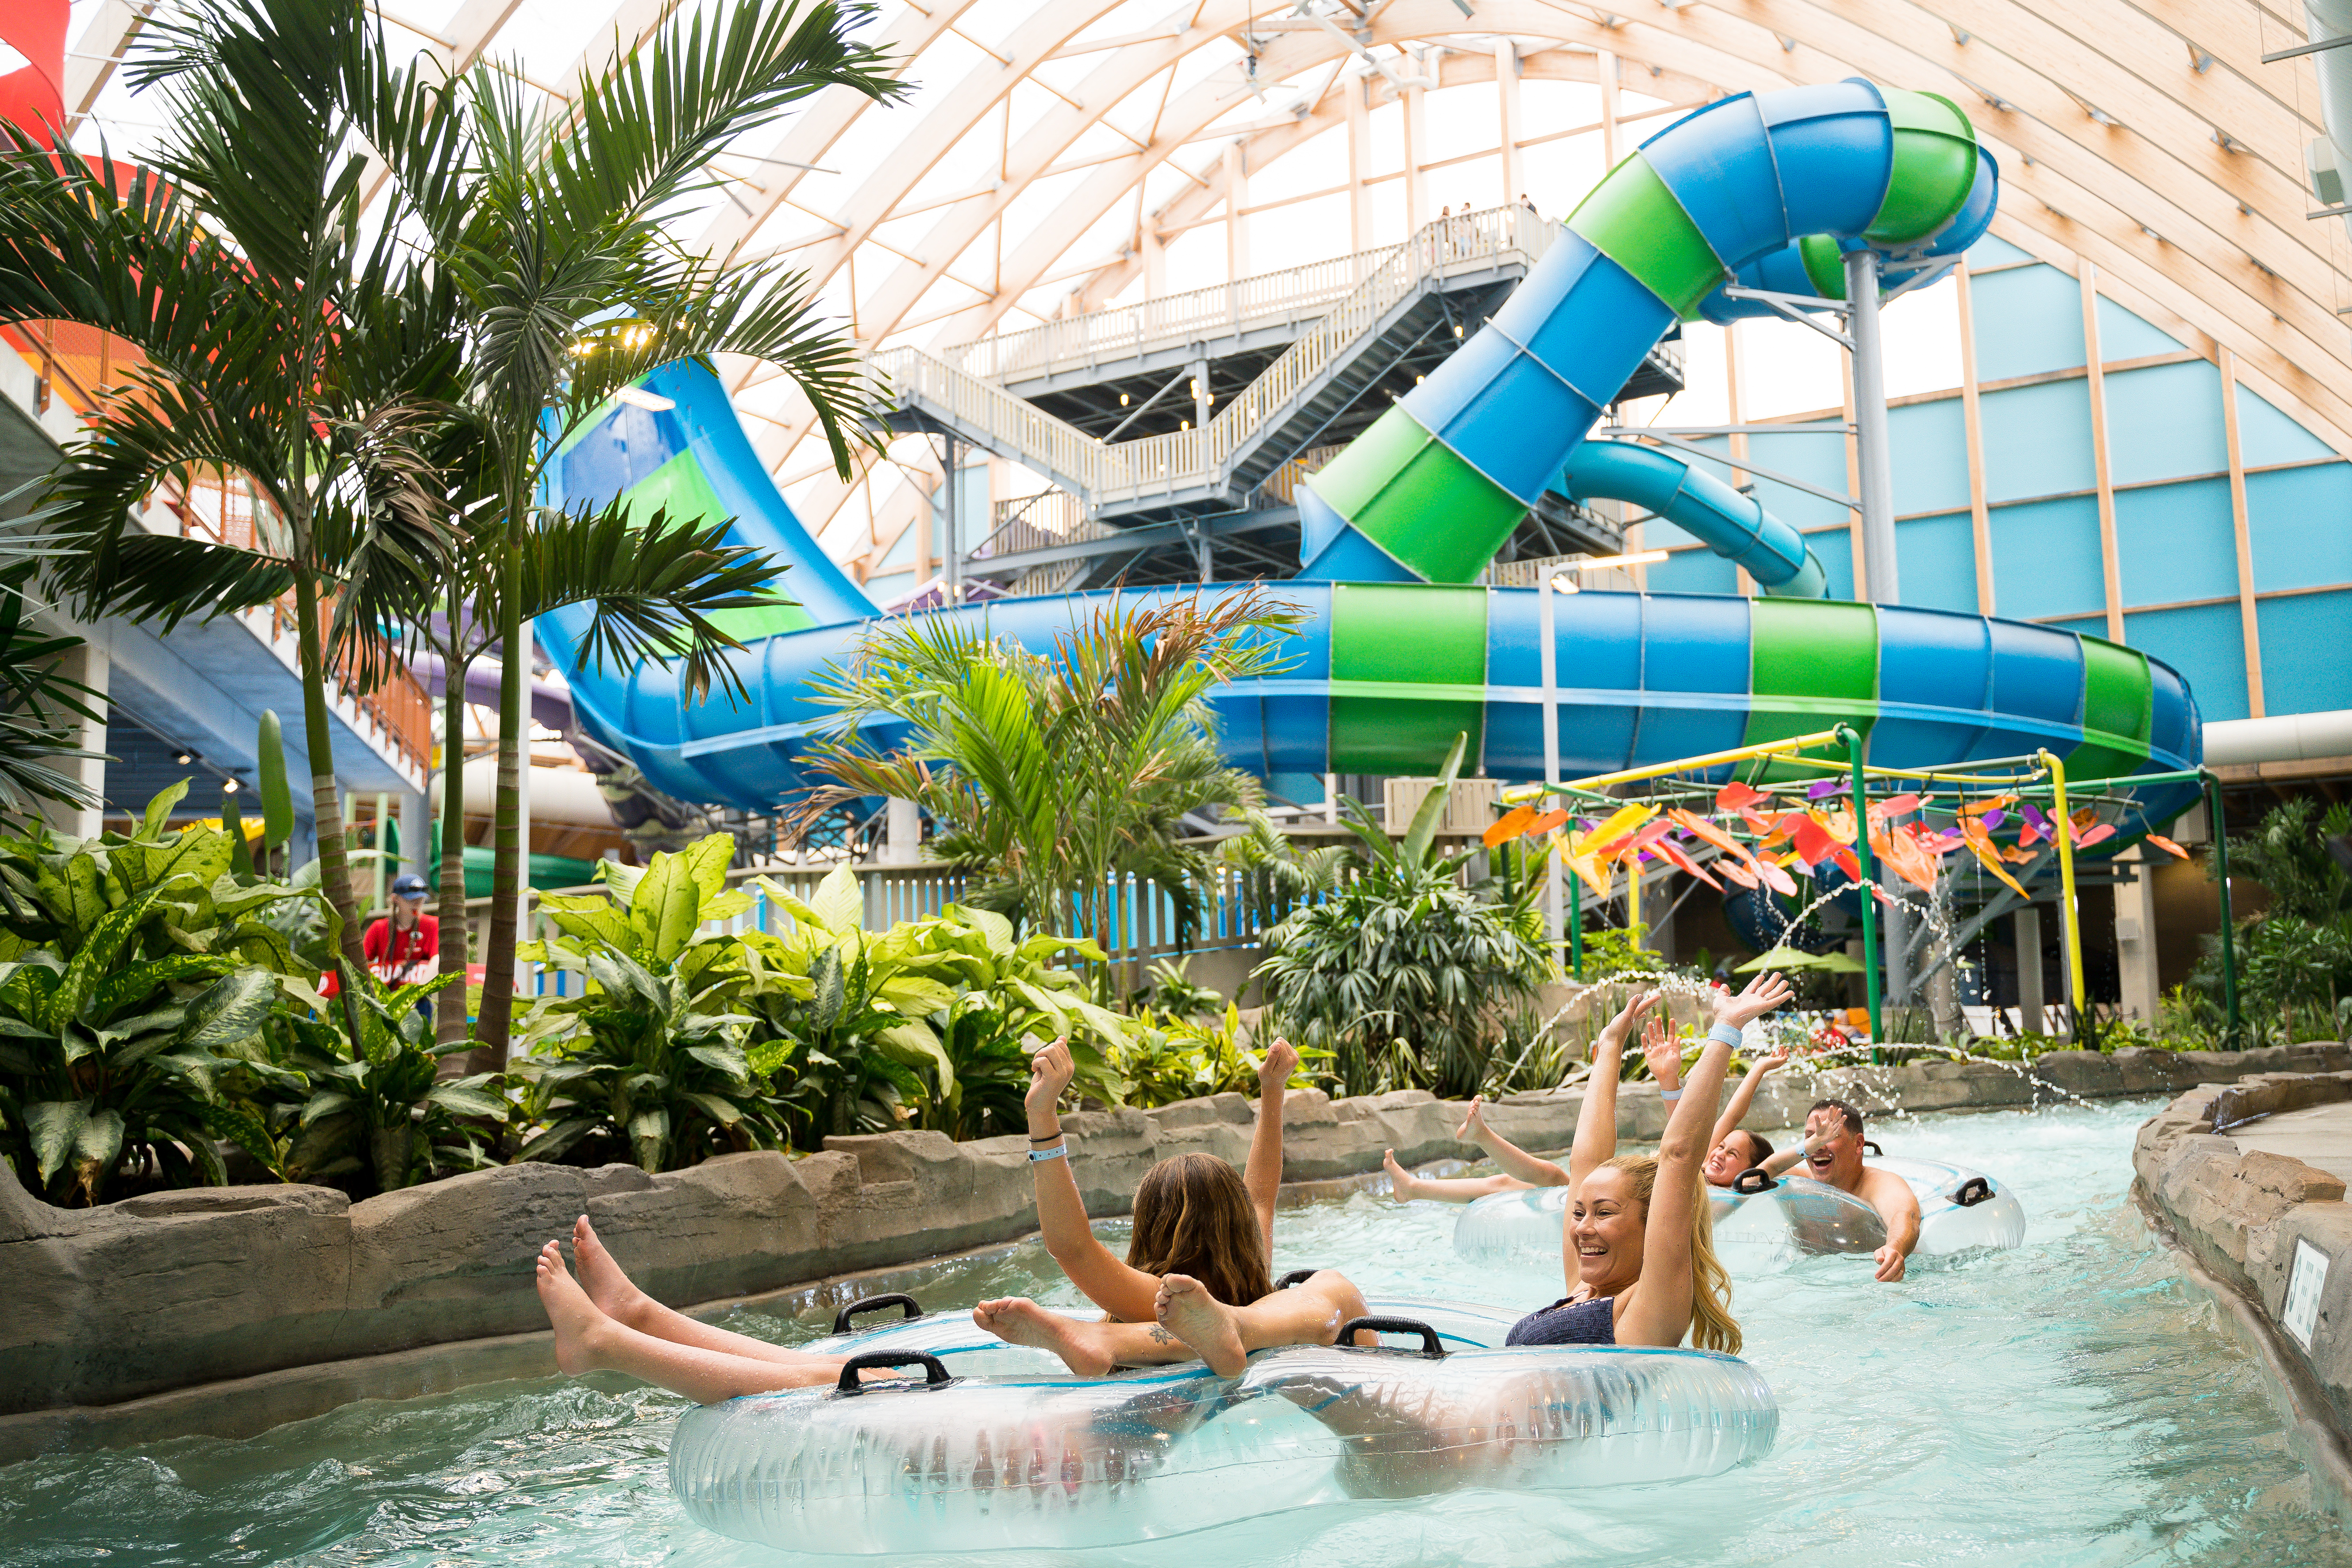 Colossalcon - New waterpark event and waterpark day pass info: For the  first time, we will have the waterpark open exclusively to our attendees on  Friday night from 11pm-2am. The restaurant and